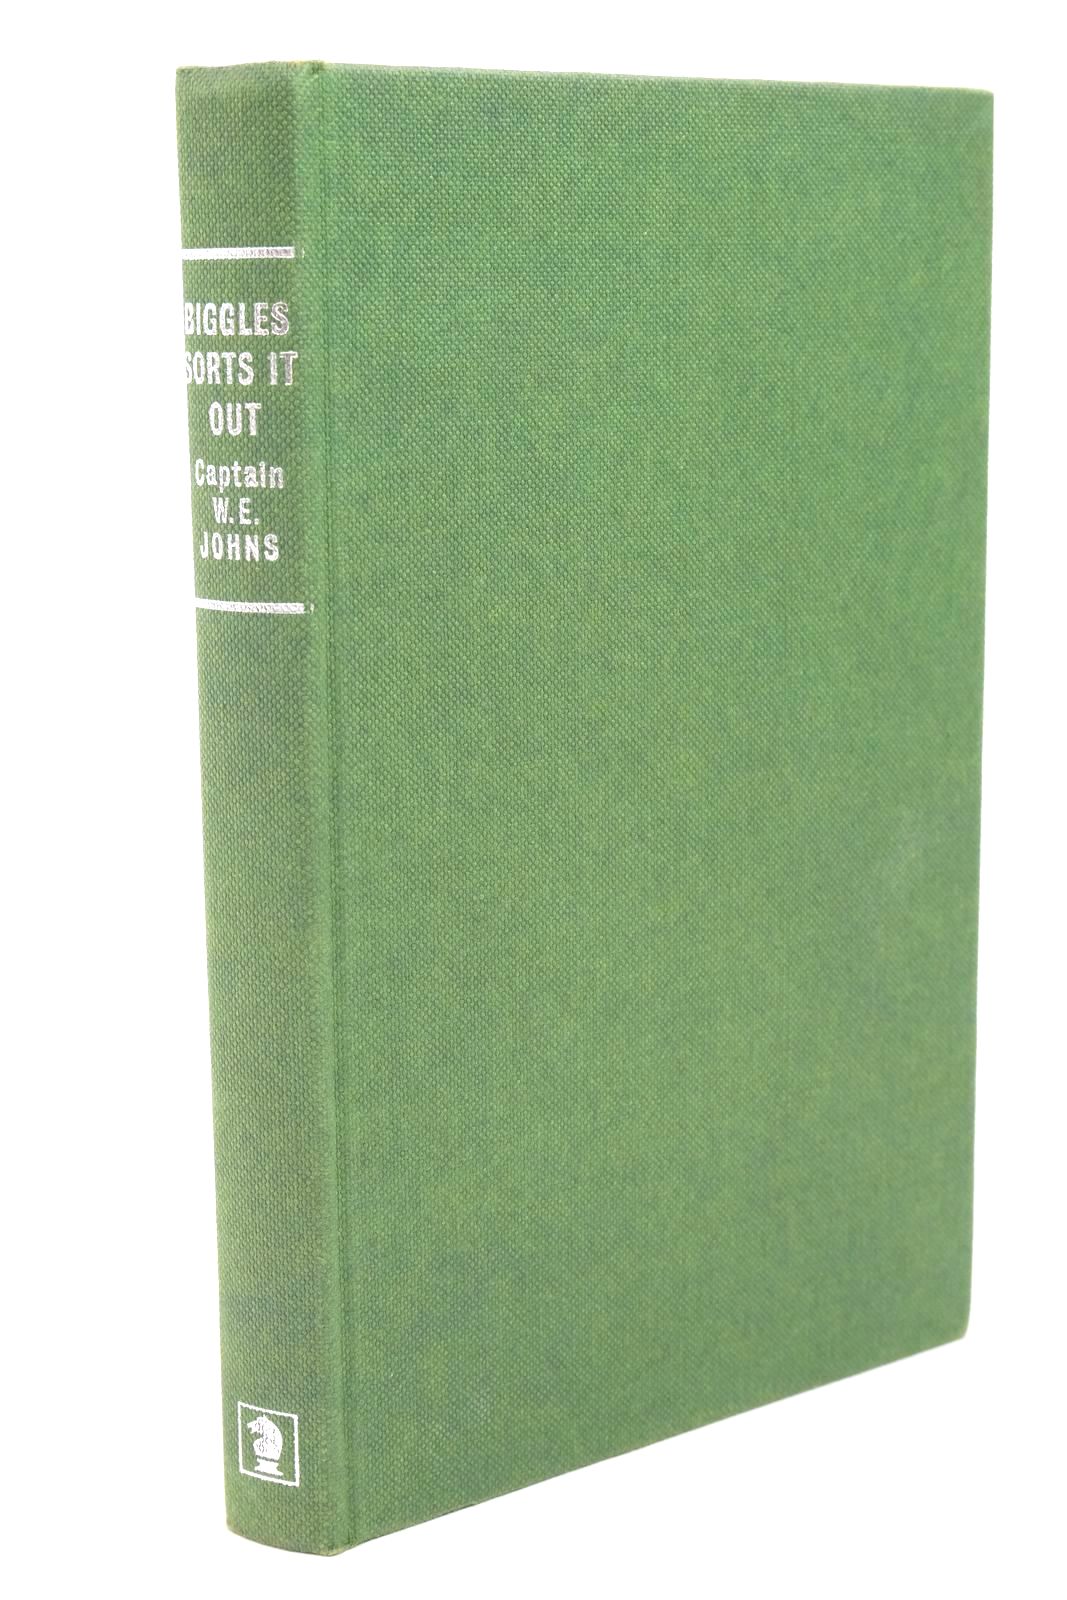 Photo of BIGGLES SORTS IT OUT written by Johns, W.E. published by Brockhampton Press (STOCK CODE: 1322741)  for sale by Stella & Rose's Books